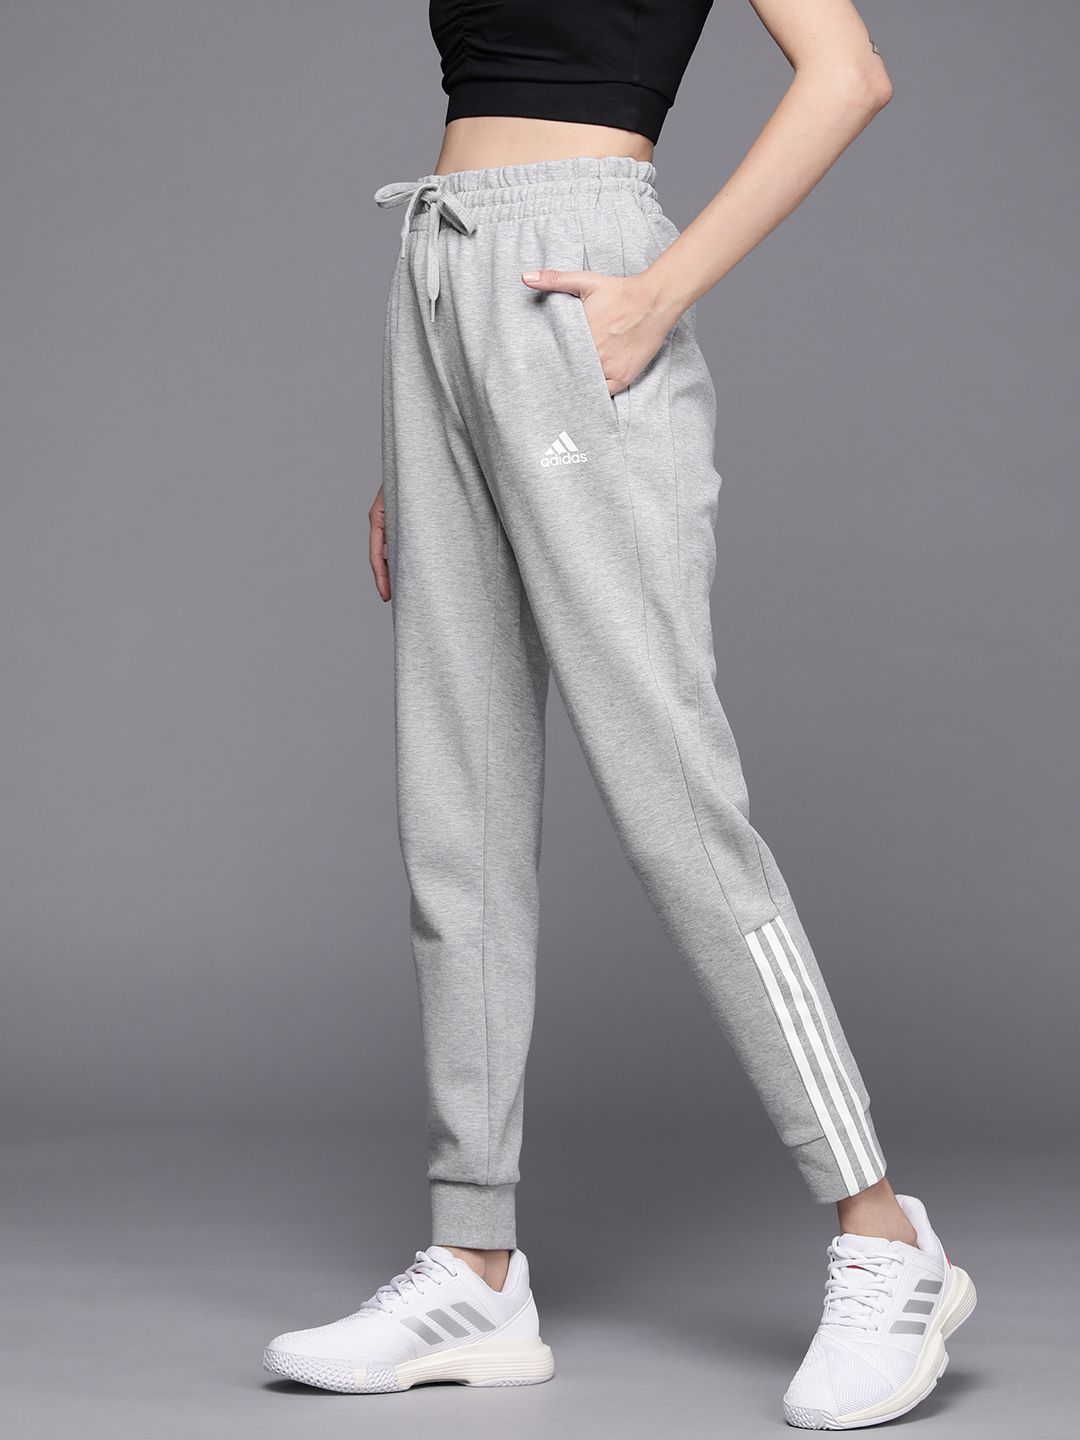 ADIDAS Women Grey Melange Solid Joggers Price in India